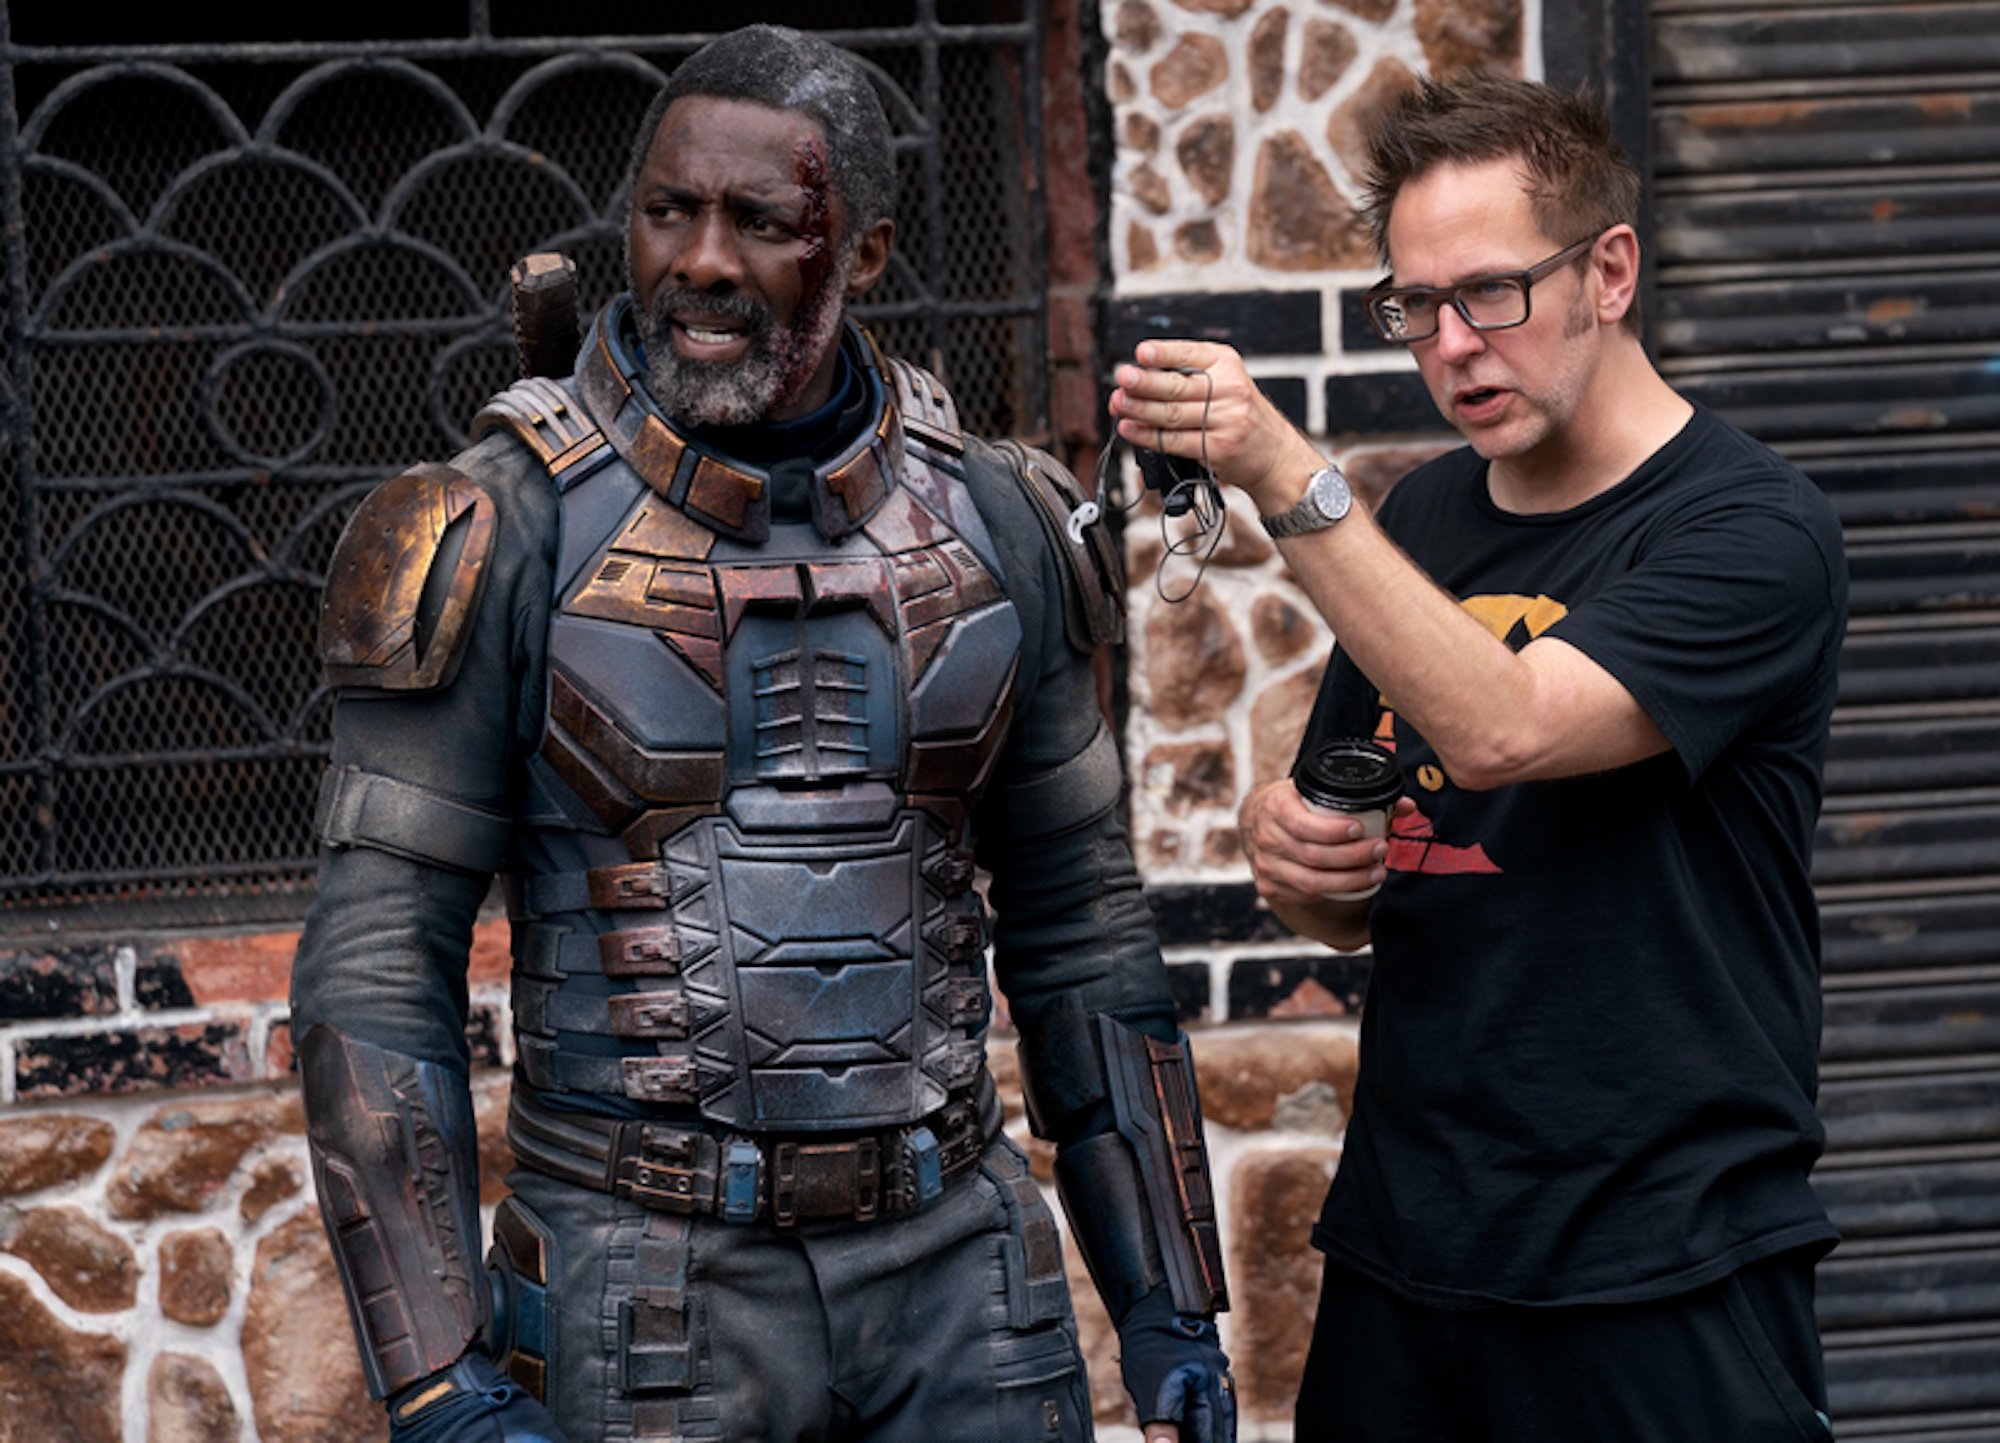 Idris Elba as Robert DuBois / Bloodsport and James Gunn, the writer/director on the set of 'The Suicide Squad'